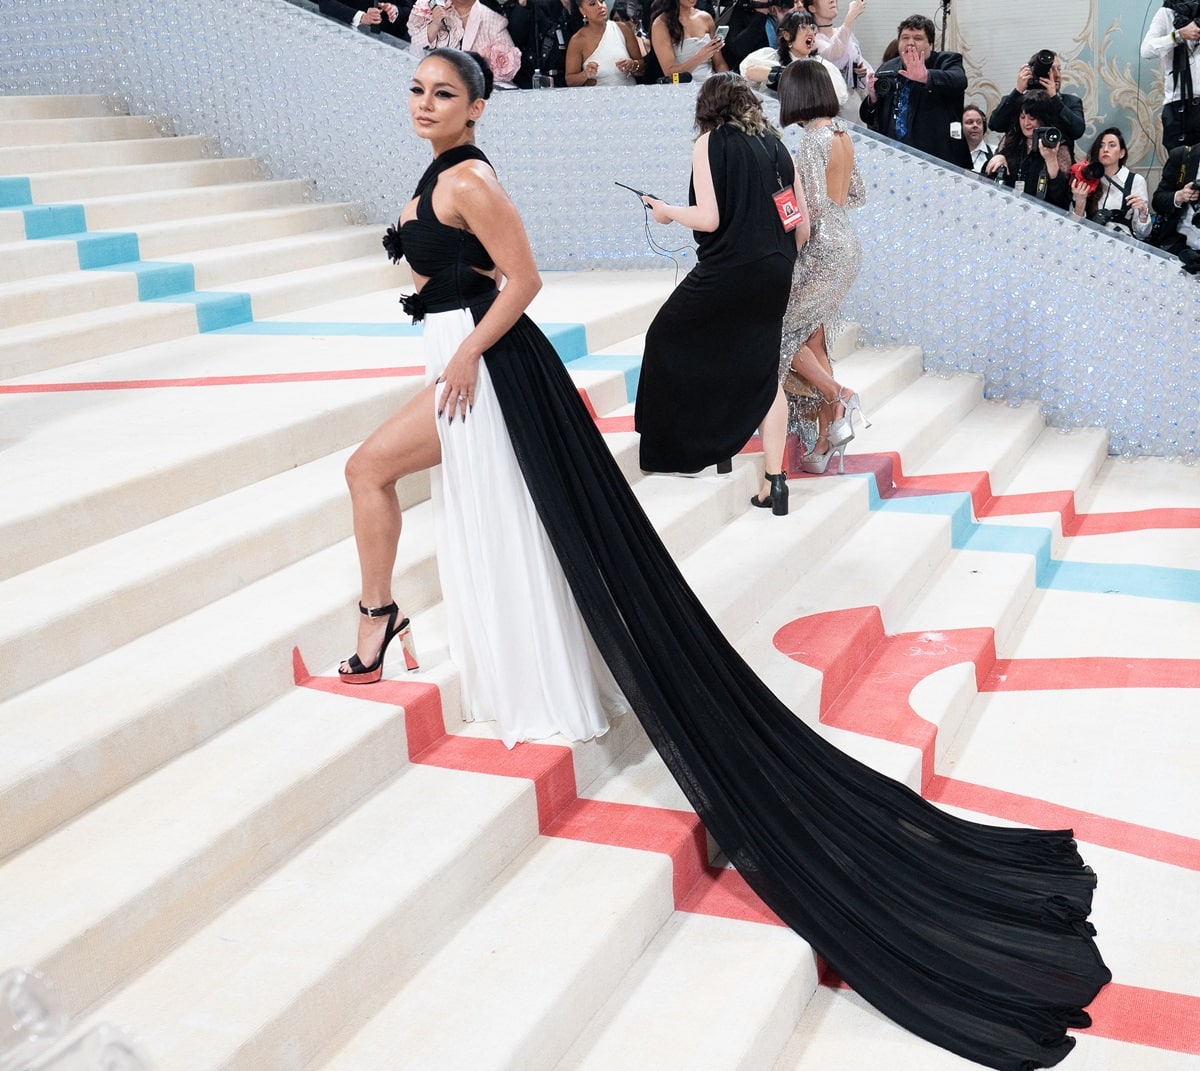 Vanessa Hudgens made a striking appearance at the 2023 Costume Institute Benefit celebrating "Karl Lagerfeld: A Line of Beauty" at the Metropolitan Museum of Art on May 1, 2023, in New York City, captivating everyone as she stepped onto the red carpet